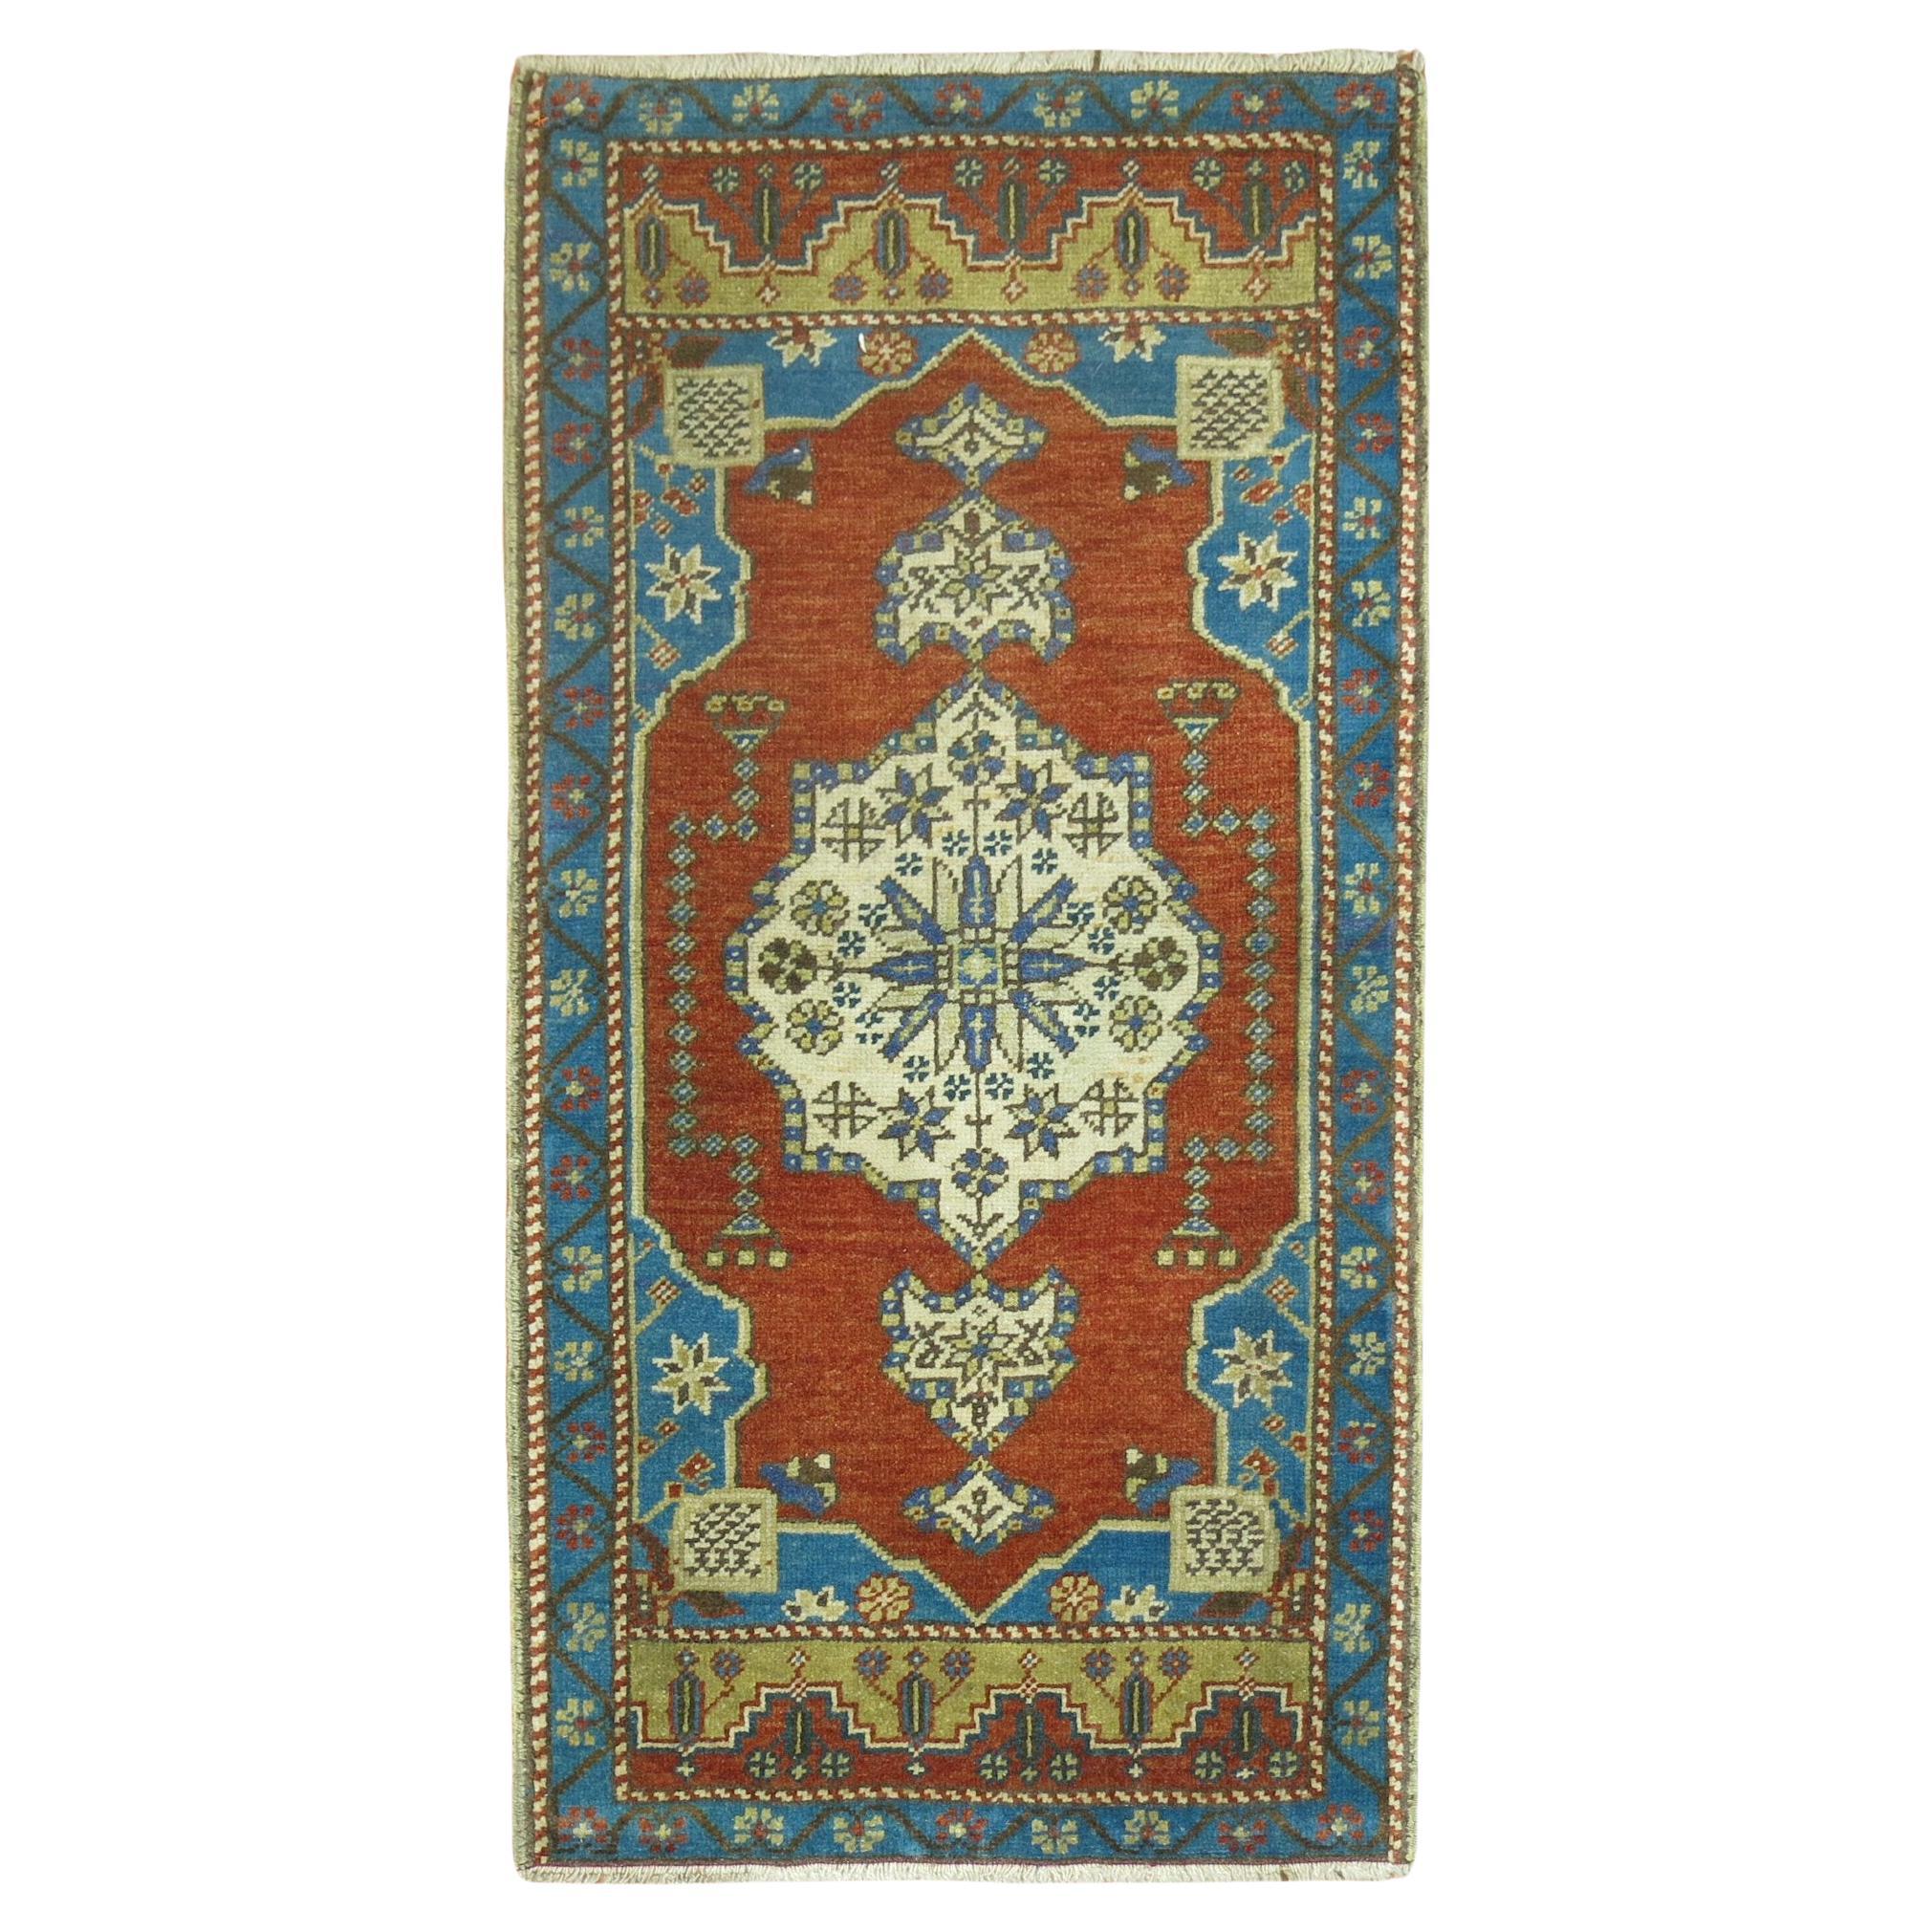 Early 20th Century Turkish Small Rug